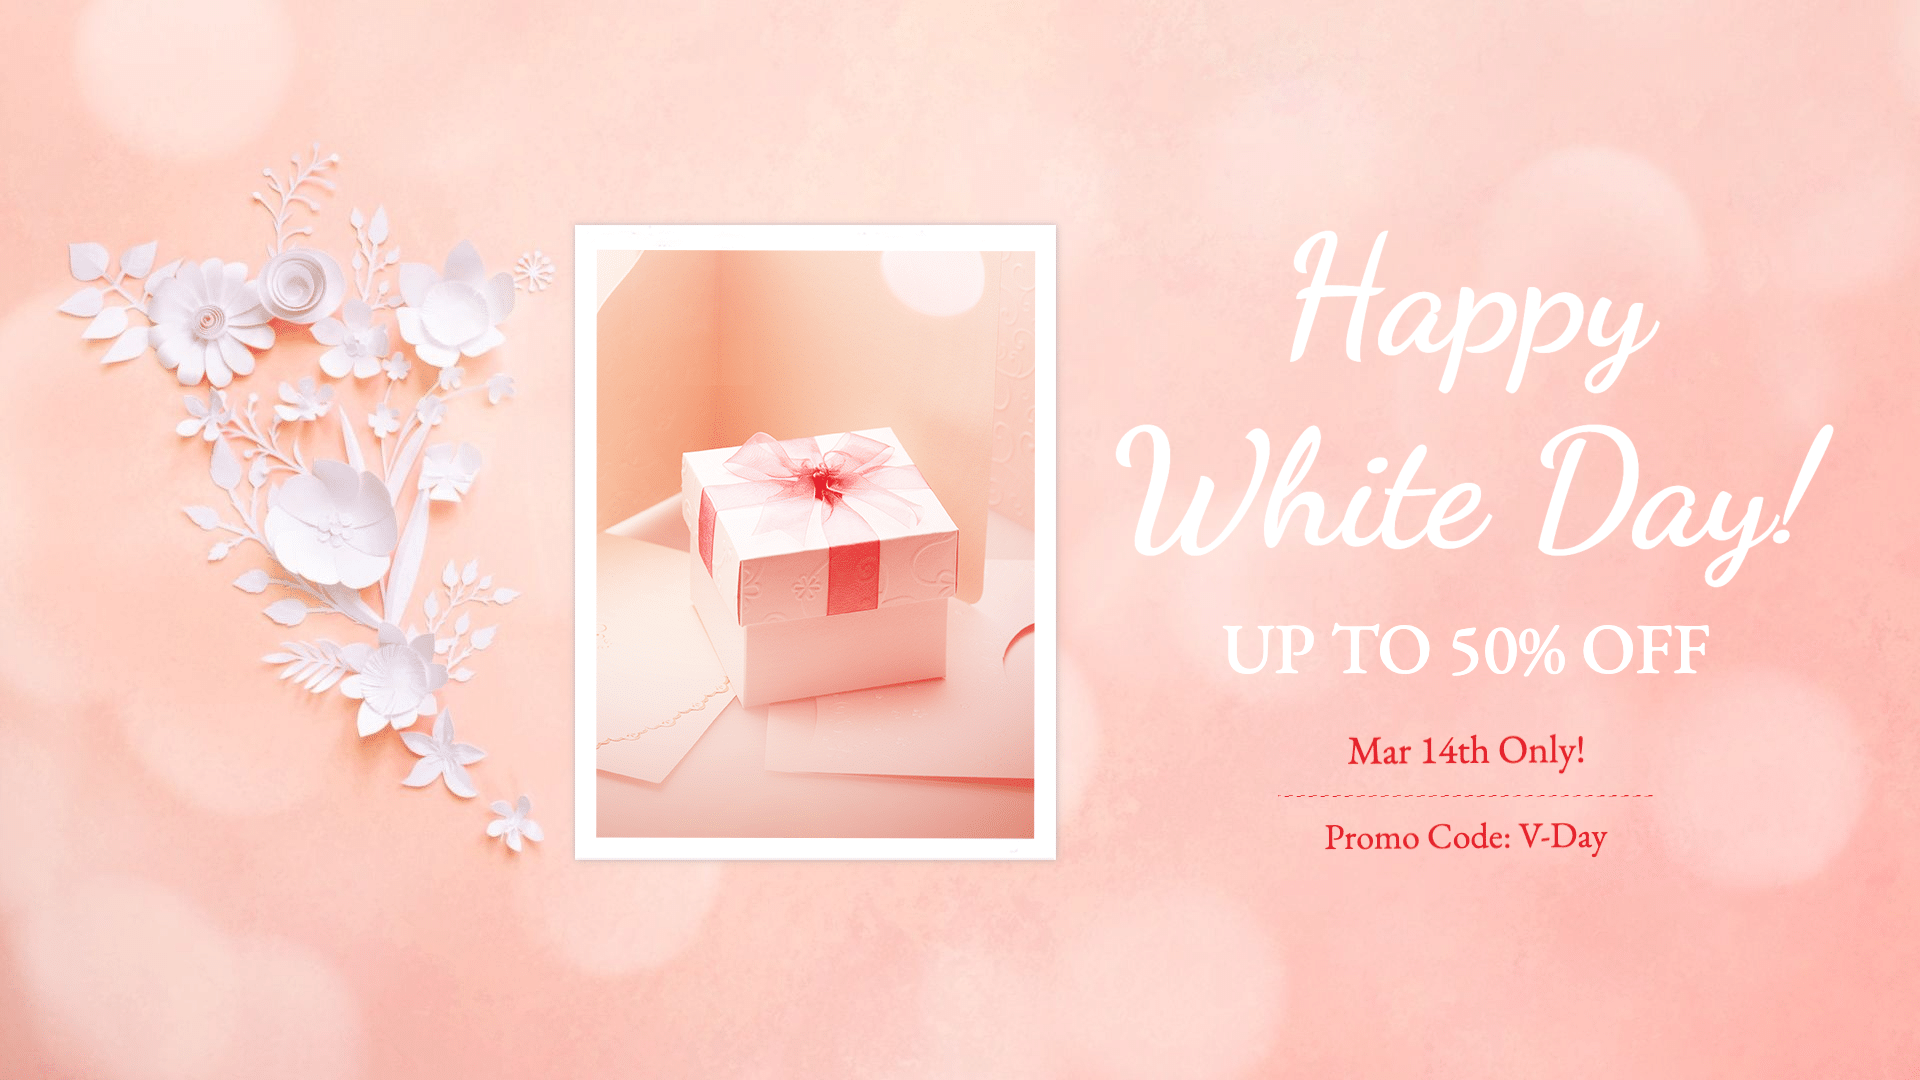 Simple Style White Day Discount Ecommerce Banner预览效果